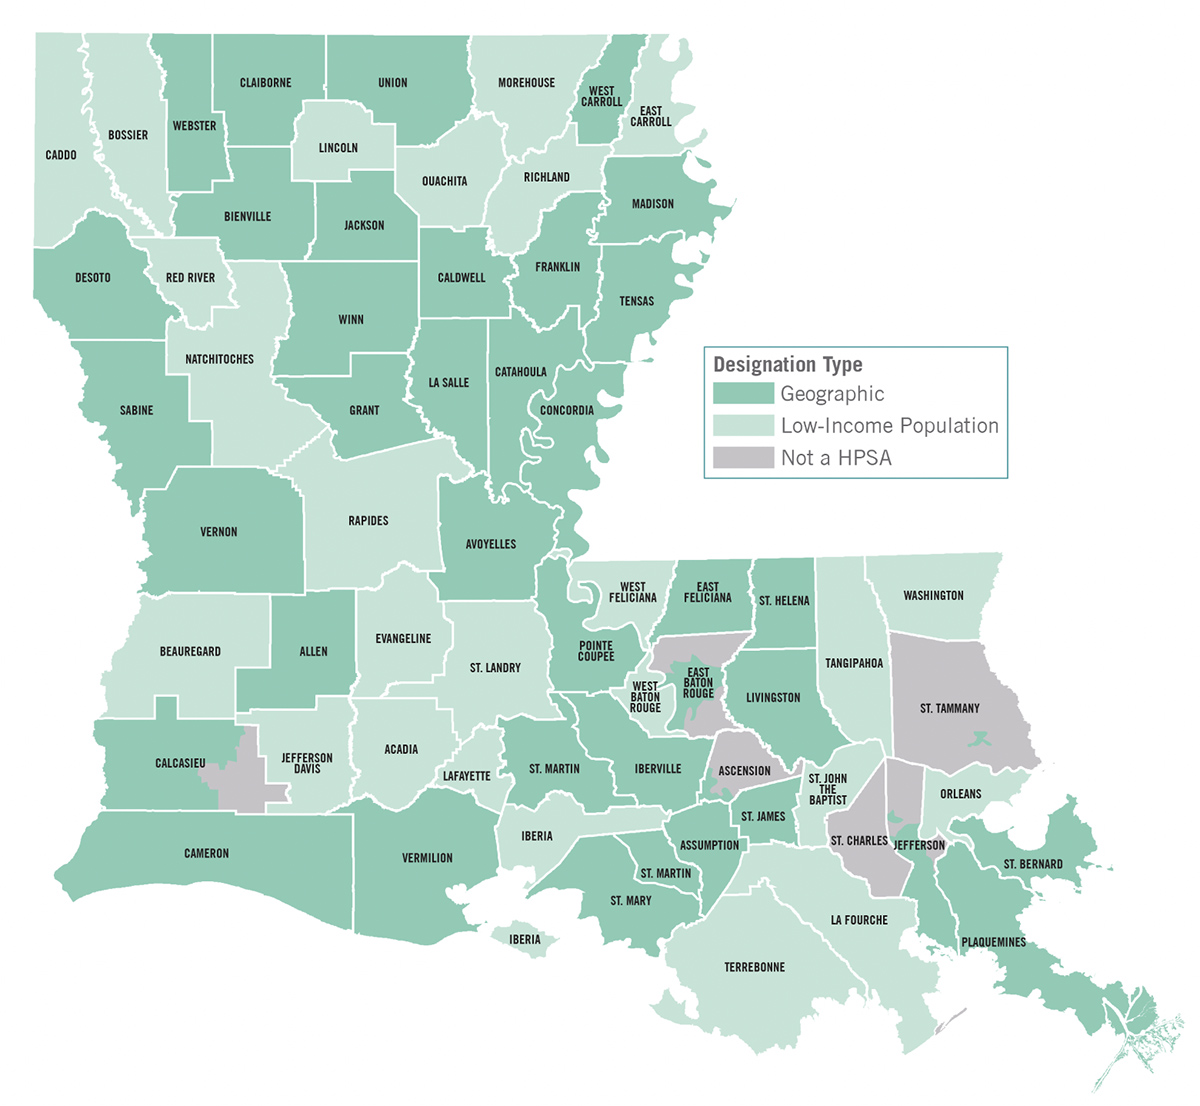 Map of high-need areas for primary care in Louisiana